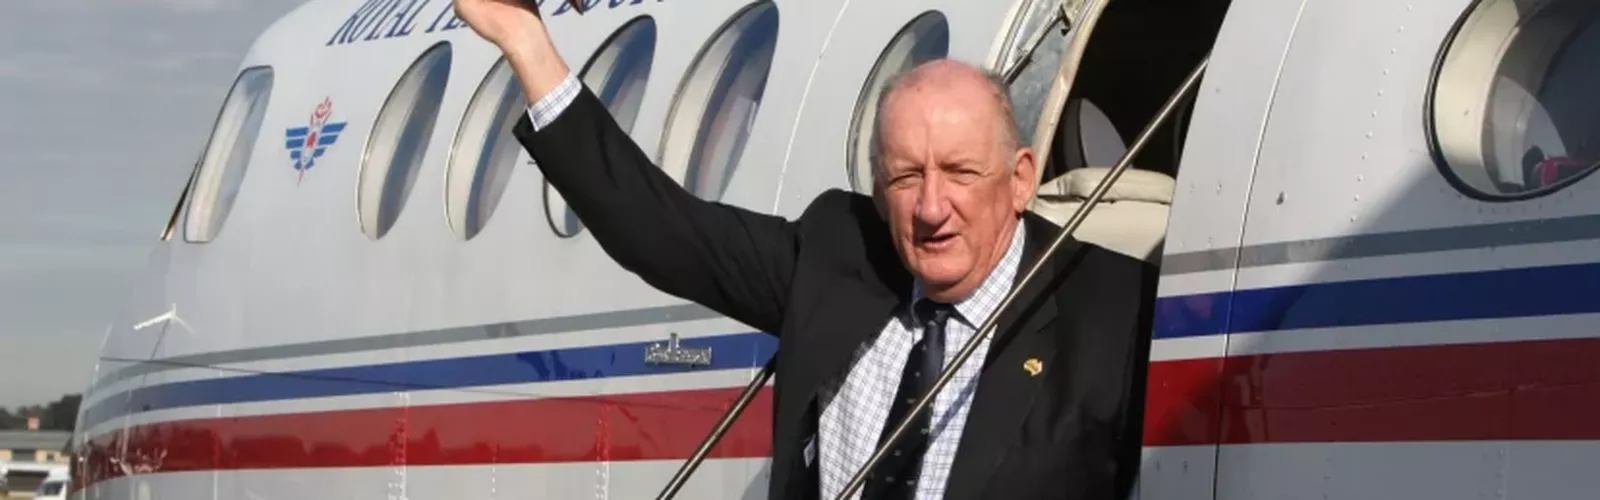 Tim Fischer sits on the steps of an RFDS plane